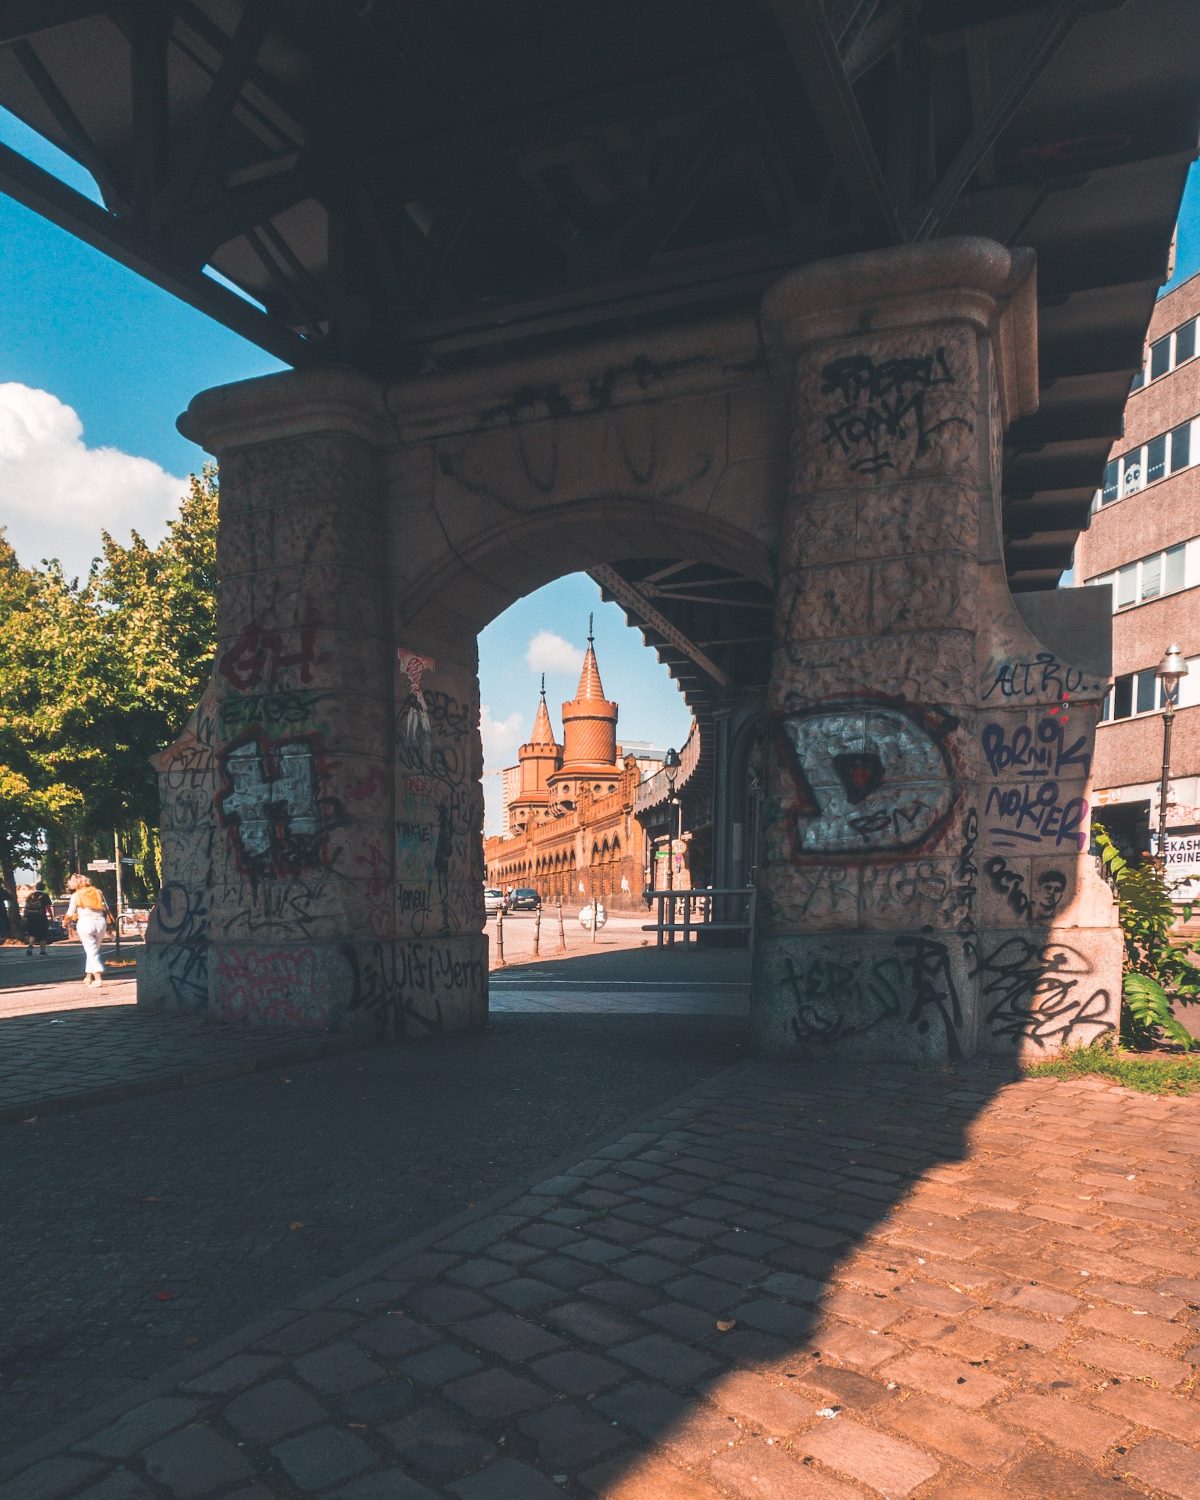 What are the best ways to navigate around Berlin as a tourist?